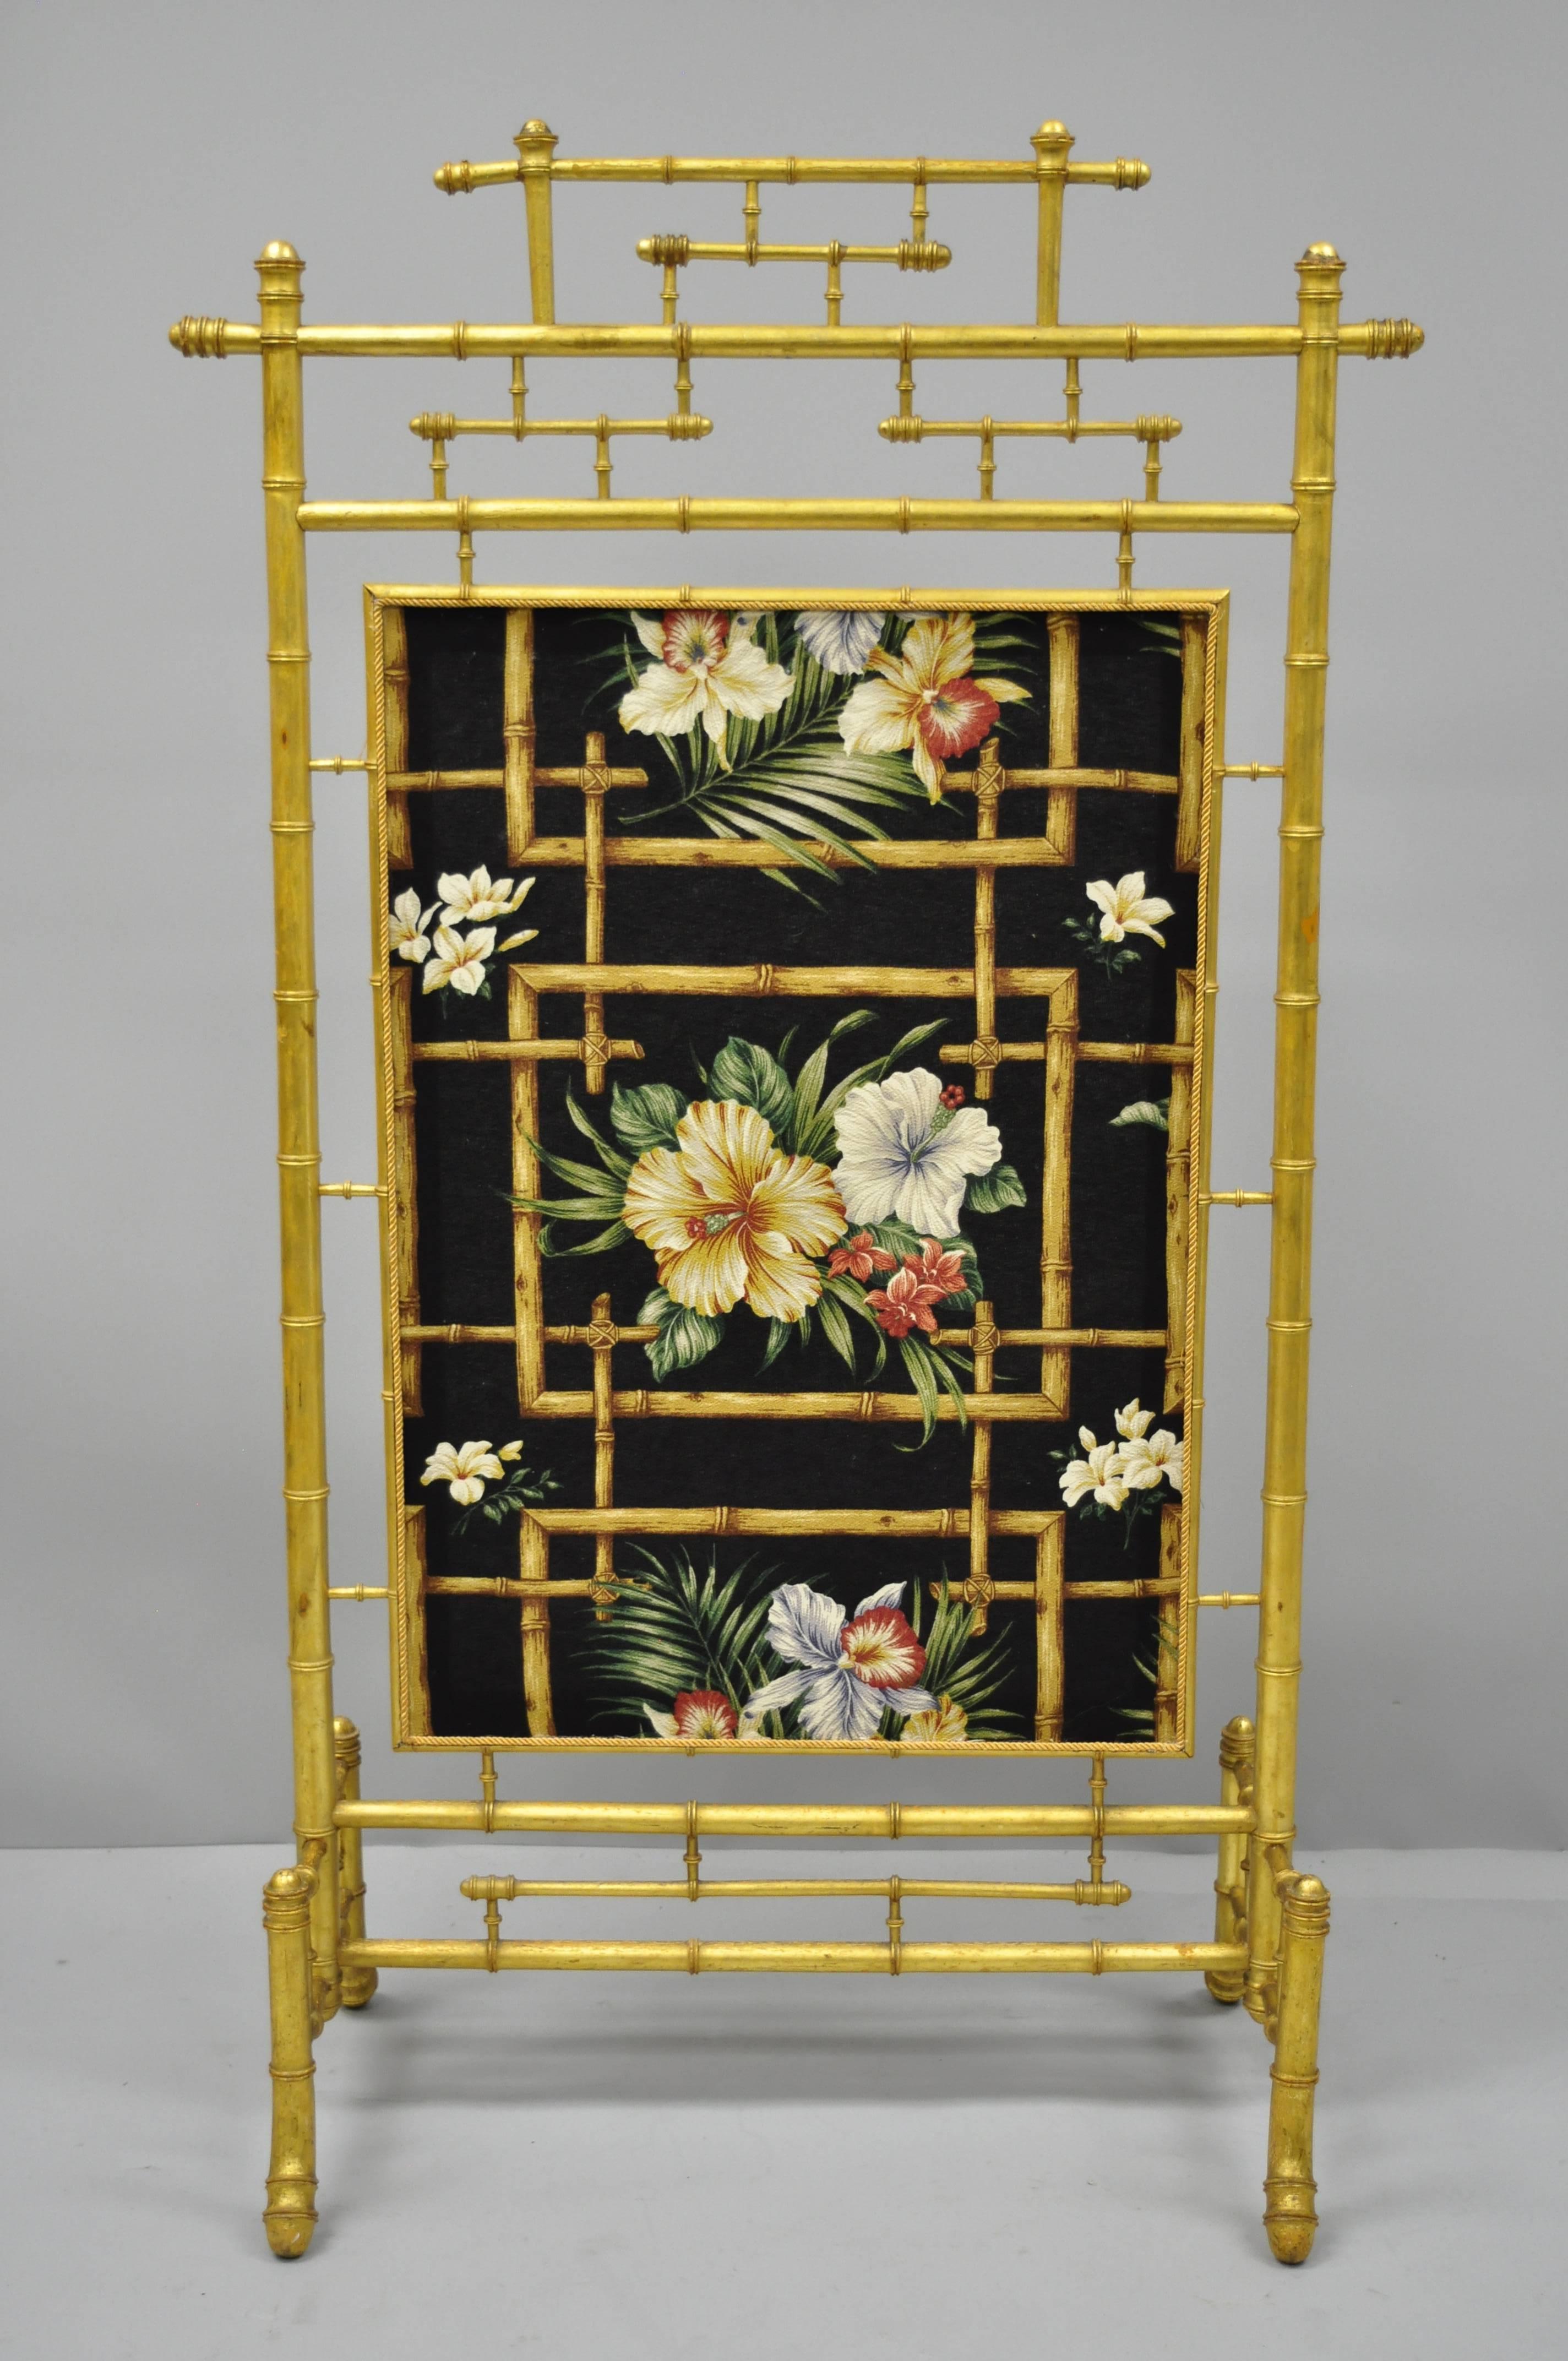 Antique Victorian aesthetic movement gold gilded faux bamboo fire screen with floral silk fabric panel. Item features gold giltwood construction, floral silk fabric with bamboo pattern, carved faux bamboo design, very nice antique item. Believed to